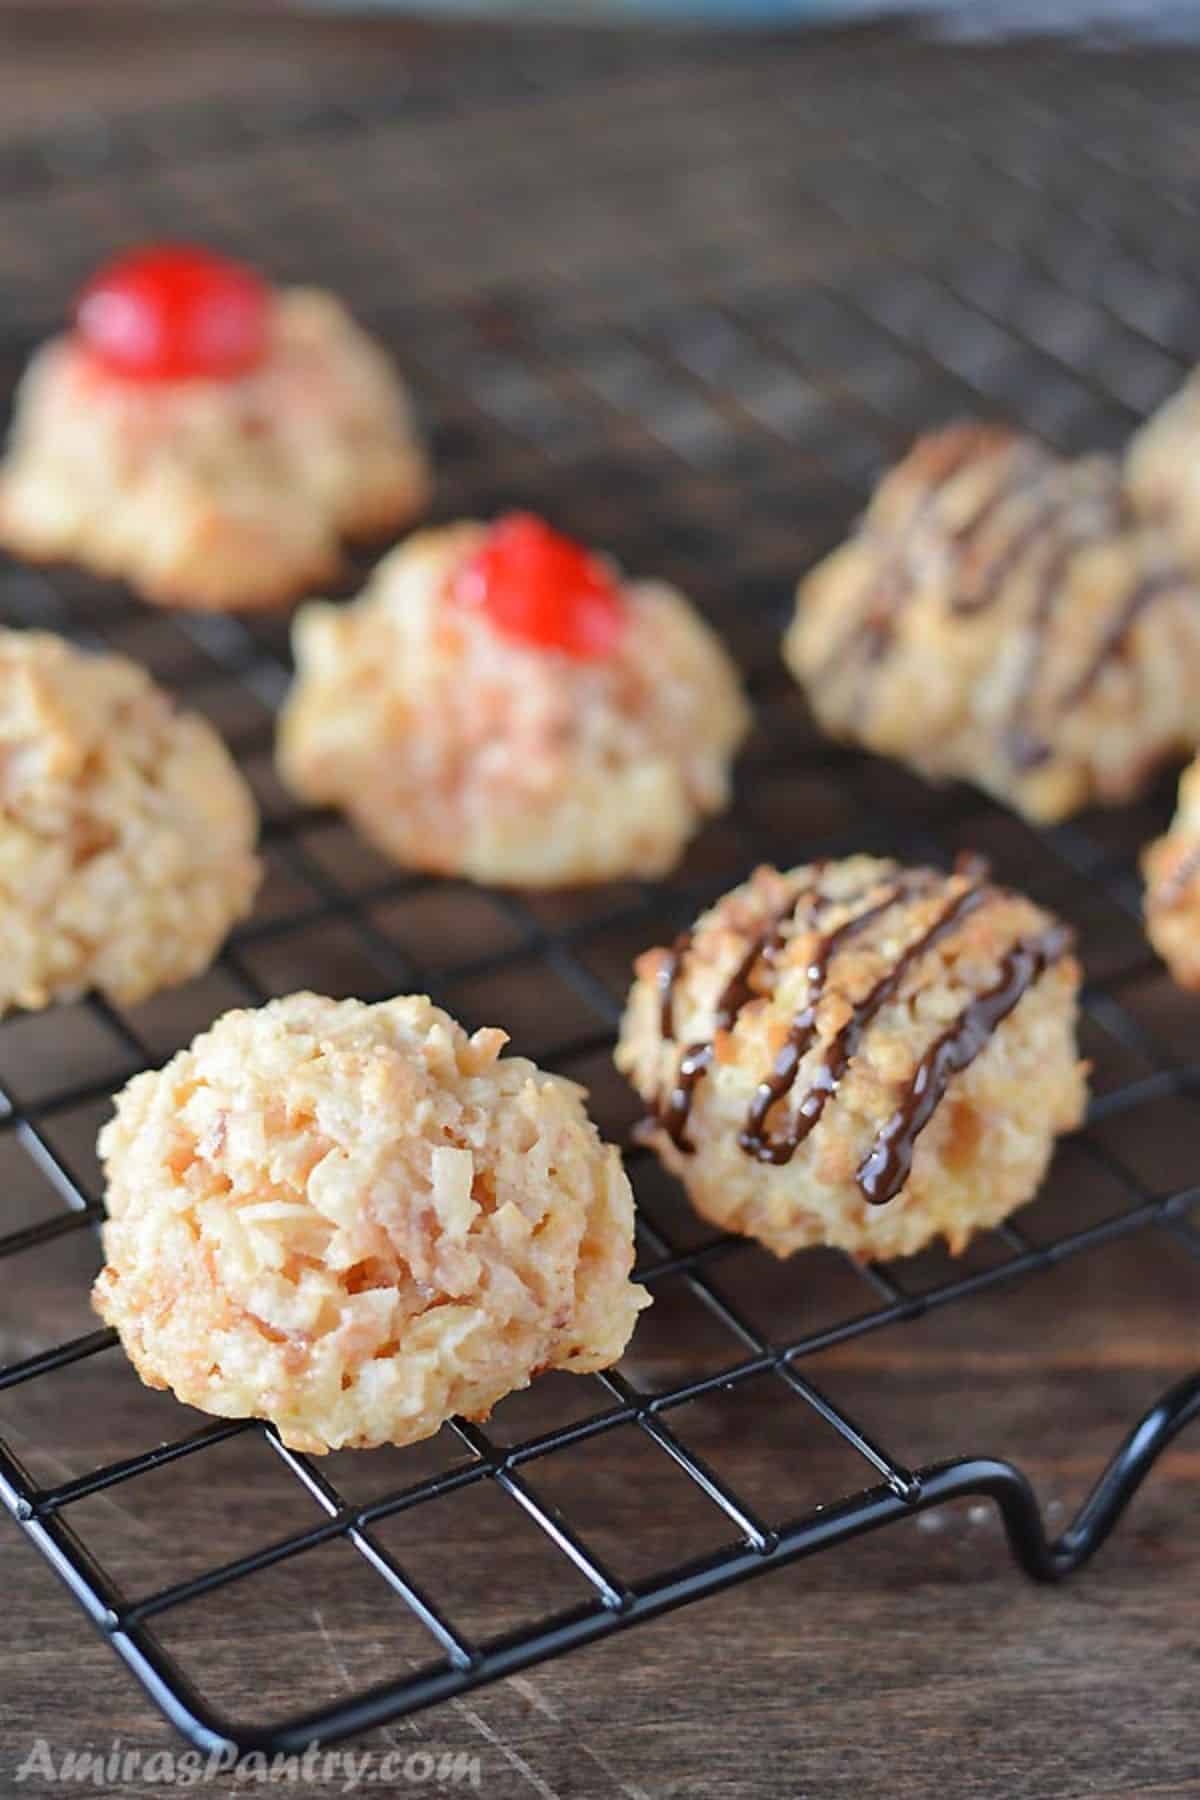 A close up look at some coconut macaroons on a cooling rack.